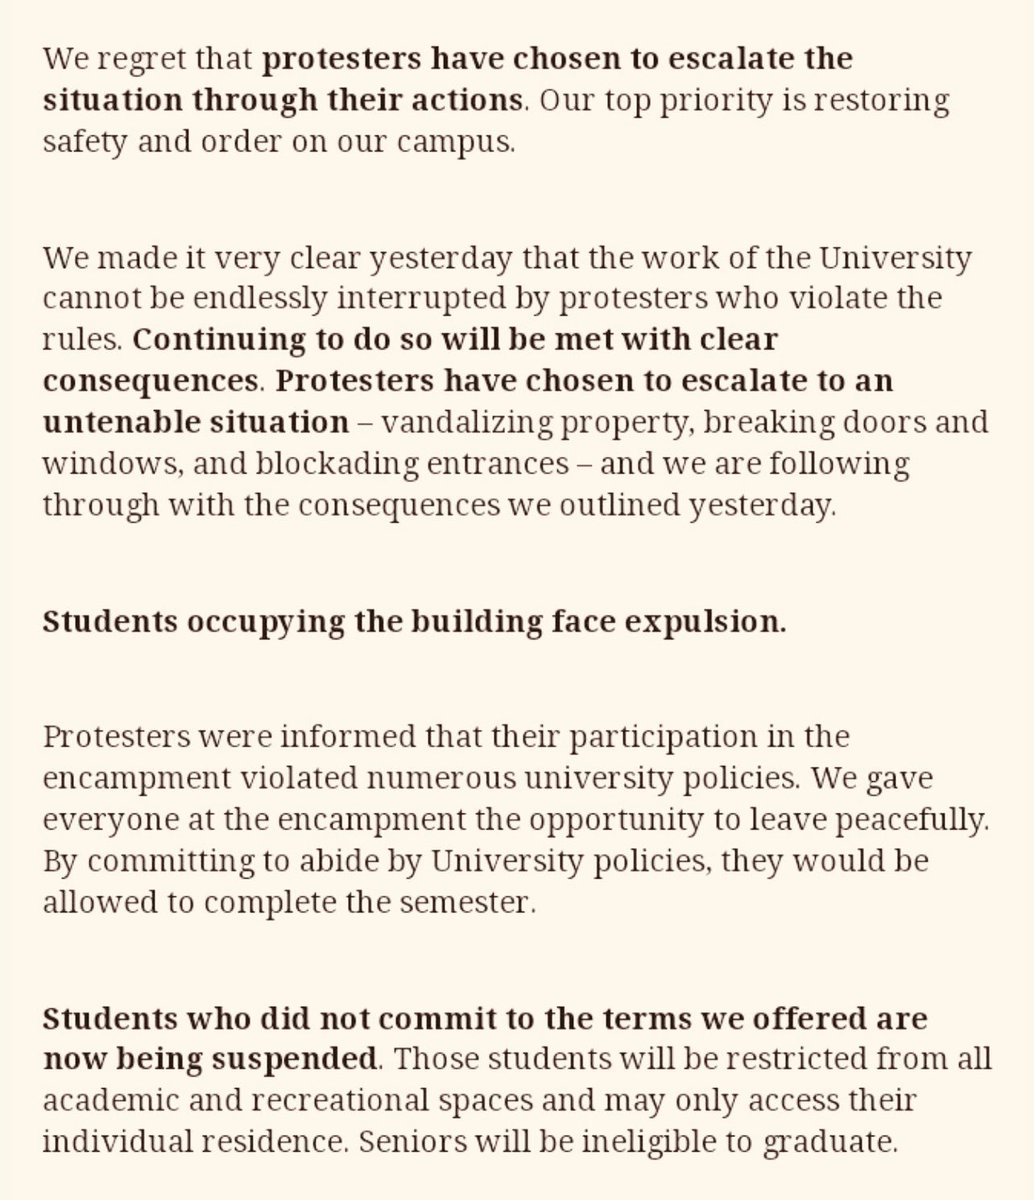 The dildo of consequences rarely arrives lubricated.

Columbia has expelled students who occupied buildings & suspended far more who will also be barred from graduation.